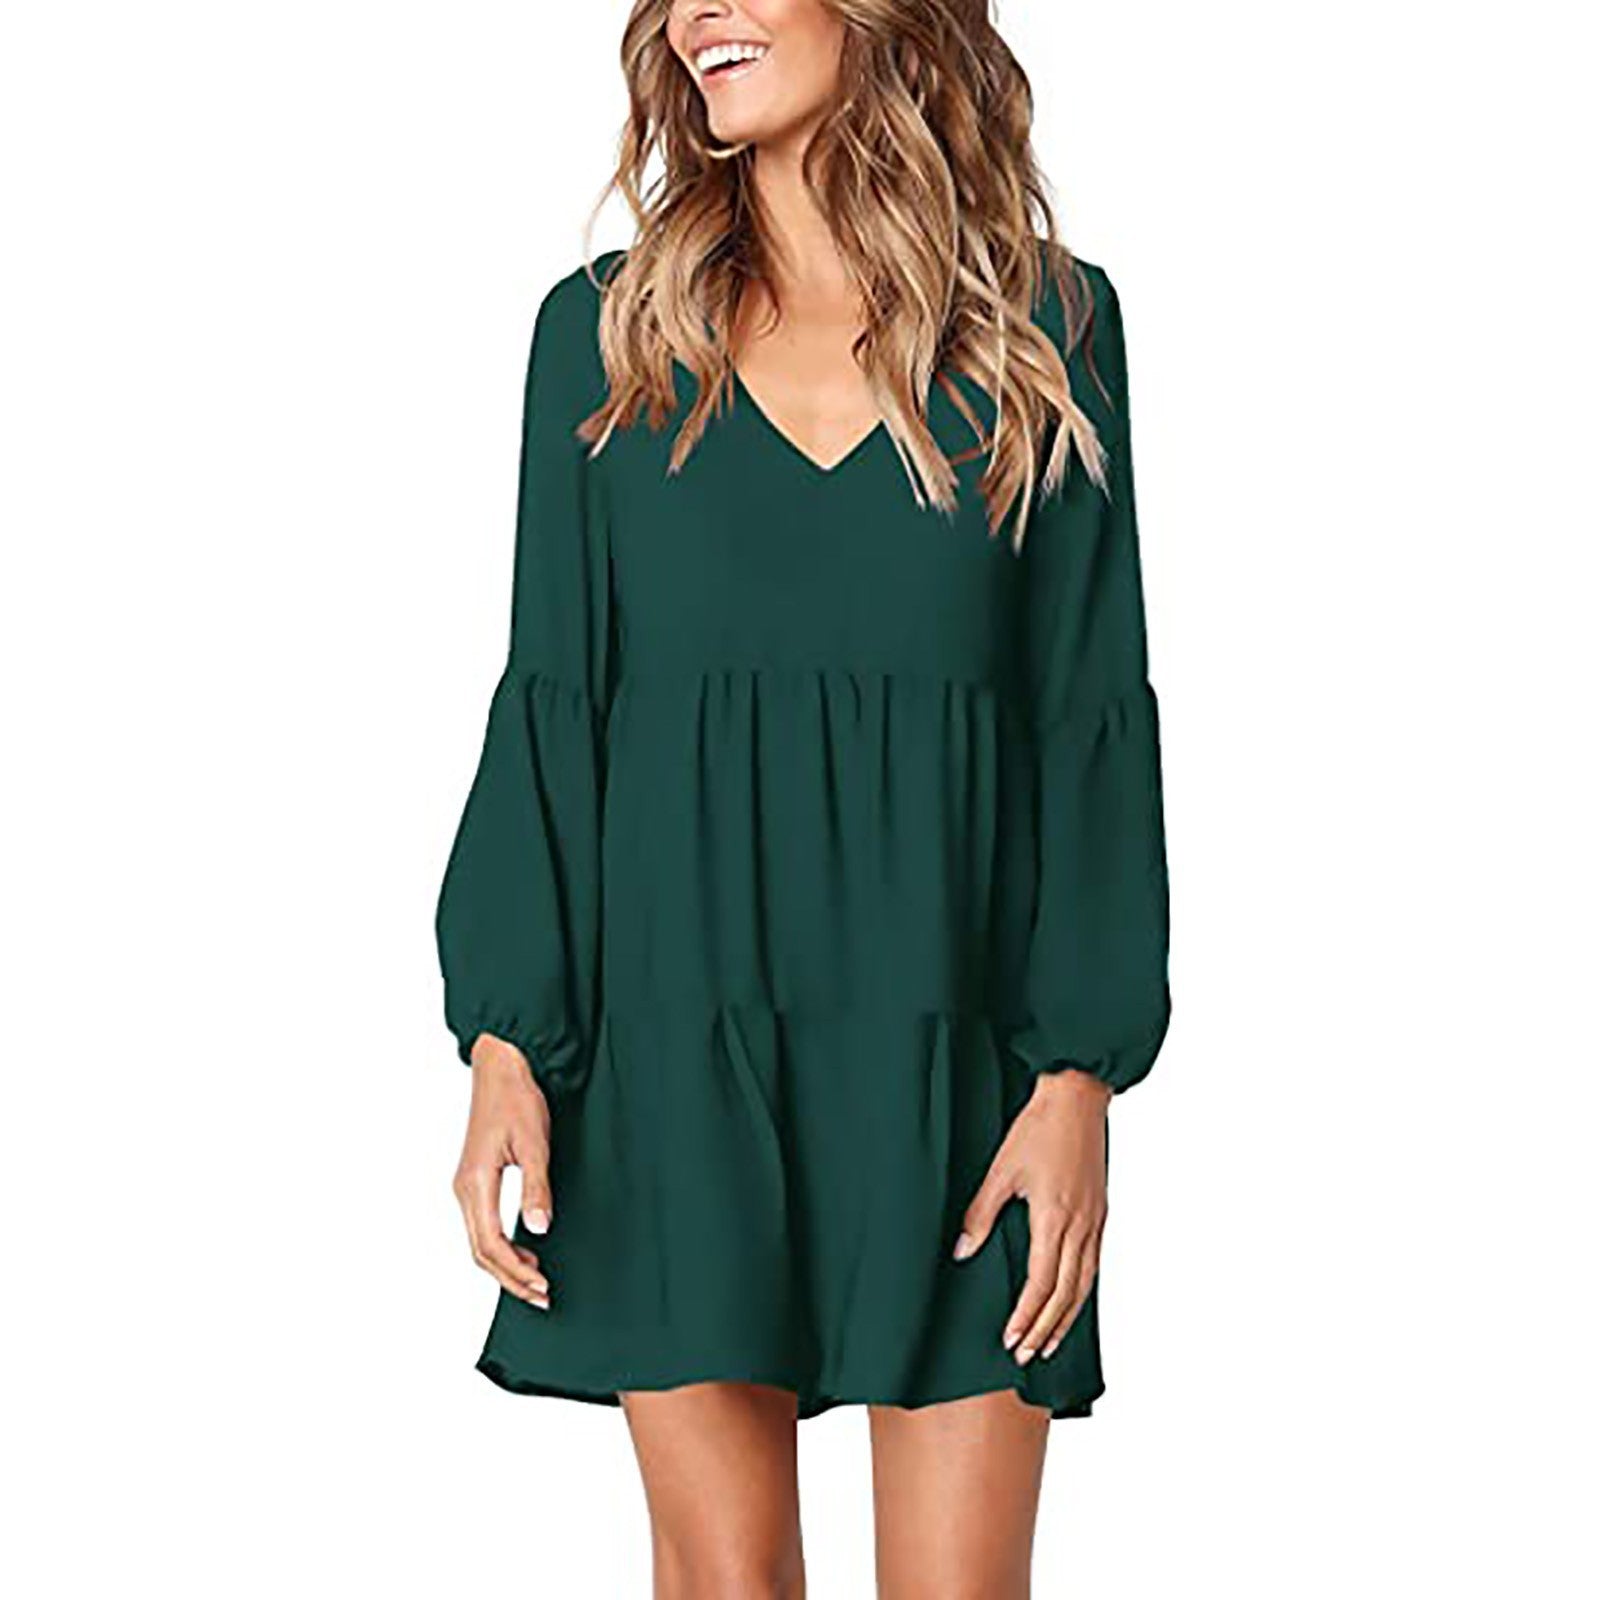 Women's Attractive Sexy V-neck Long Sleeve Dresses